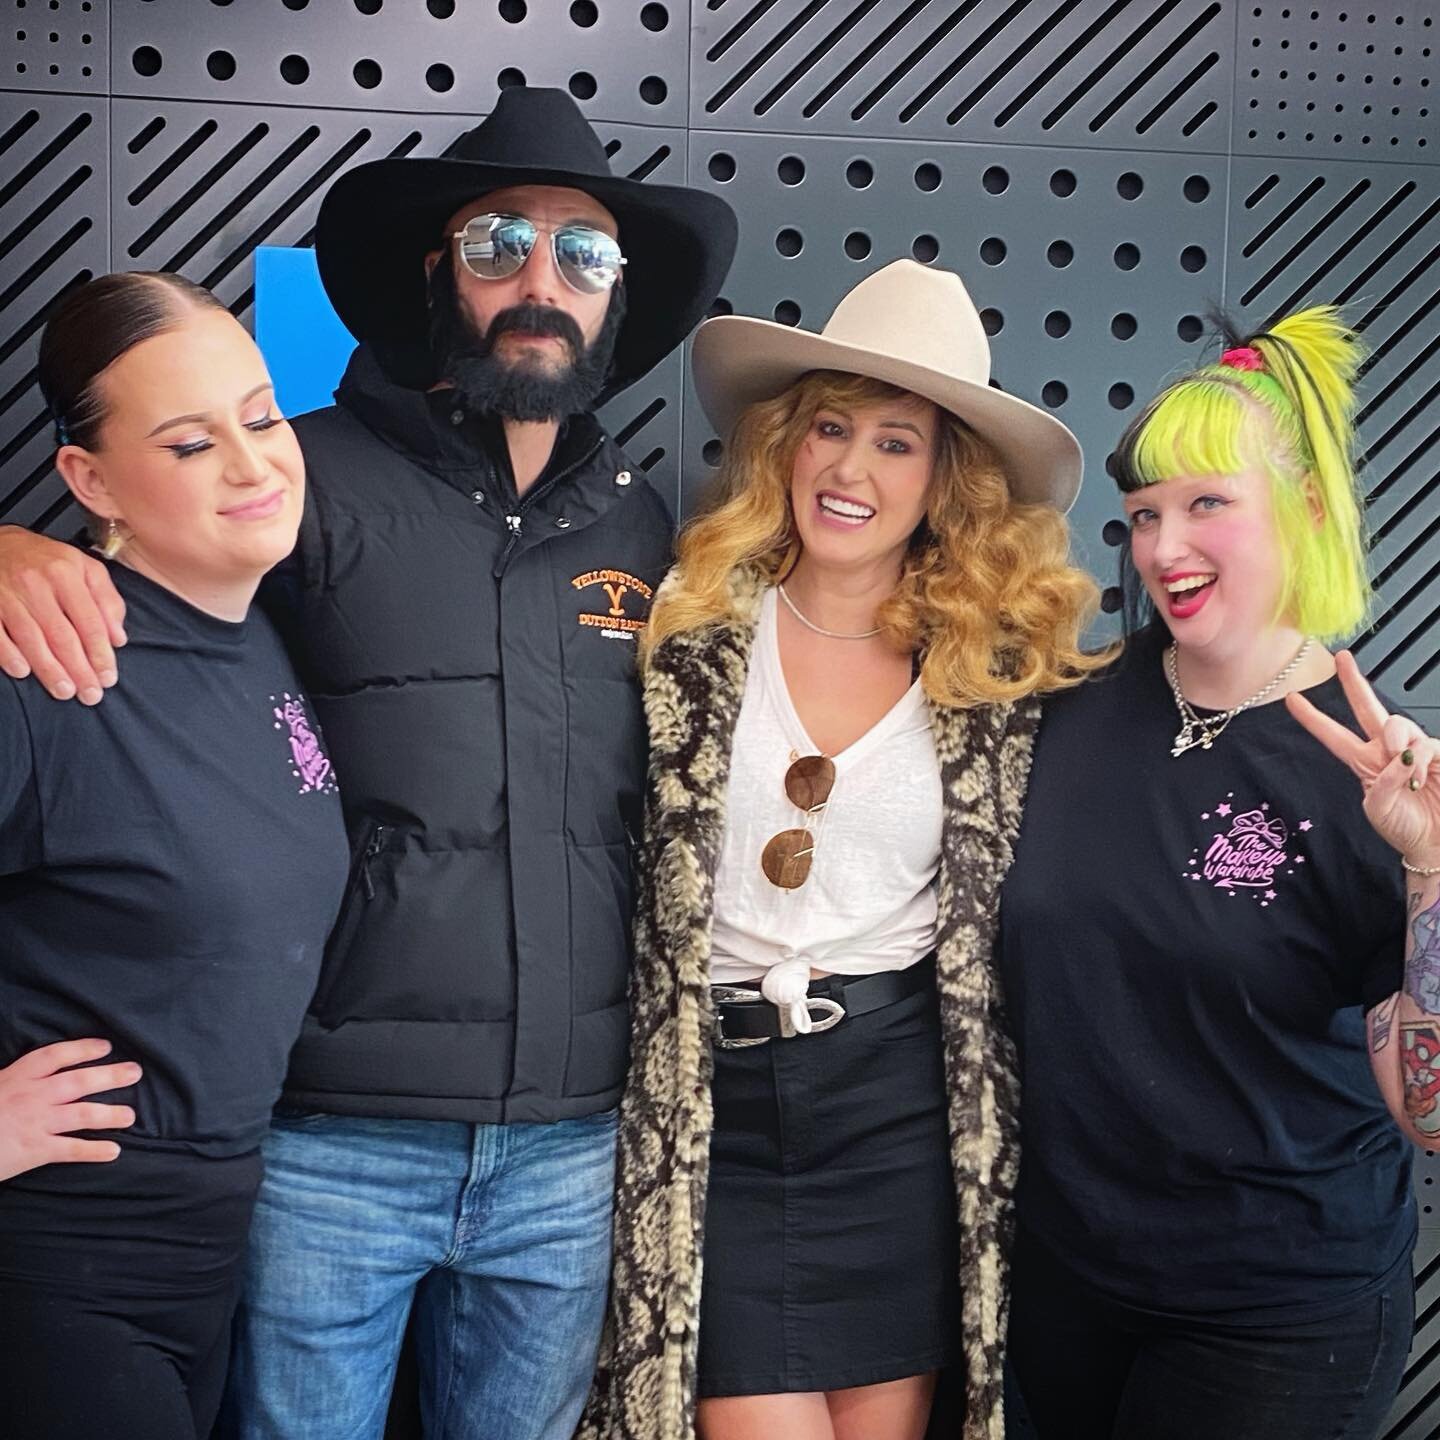 Thanks for having us @stanaustralia 🤠!
Rip and Beth makeovers on @therealbeauryan and @roxyjacenko for the Yellowstone launch last night 💛 
Assisted by @laurenherseyofficial 🎀